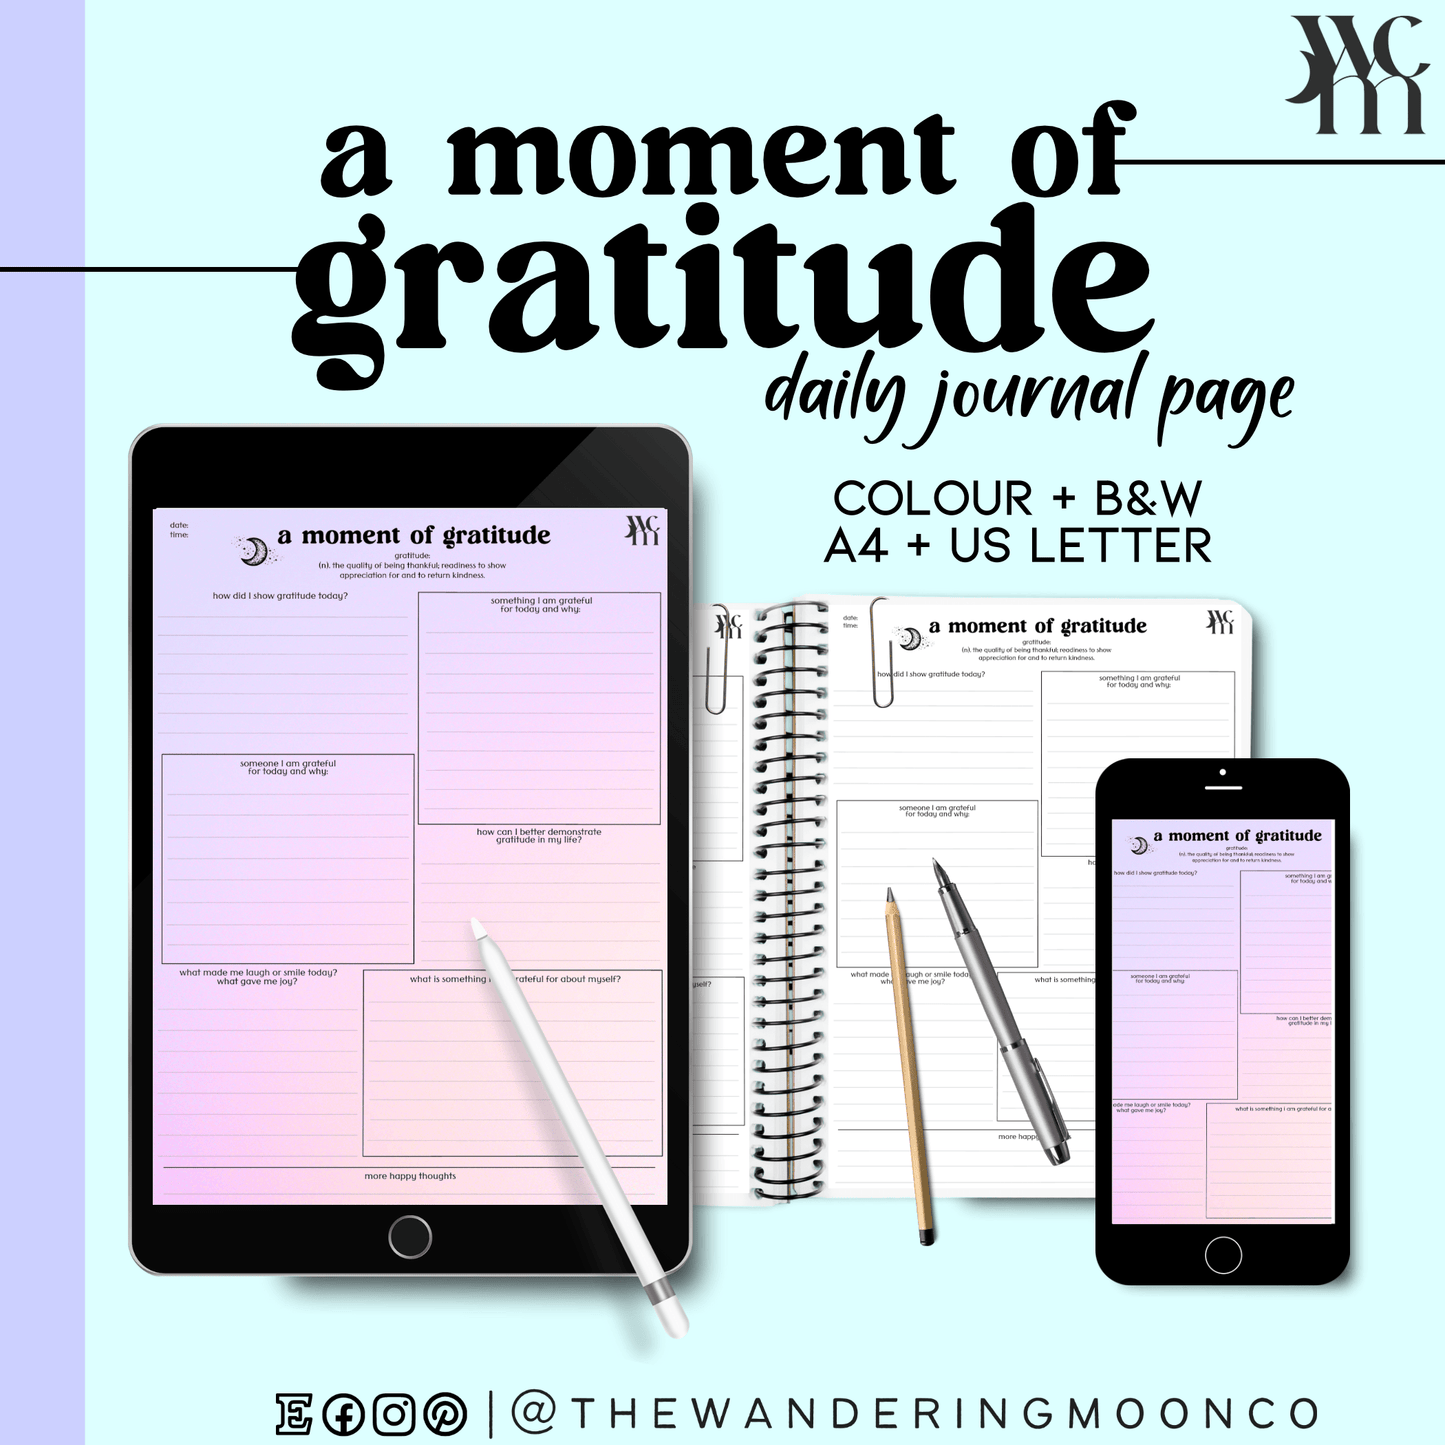 gratitude journal page: printable, digital, in colour, b&w - The Wandering Moon Co.